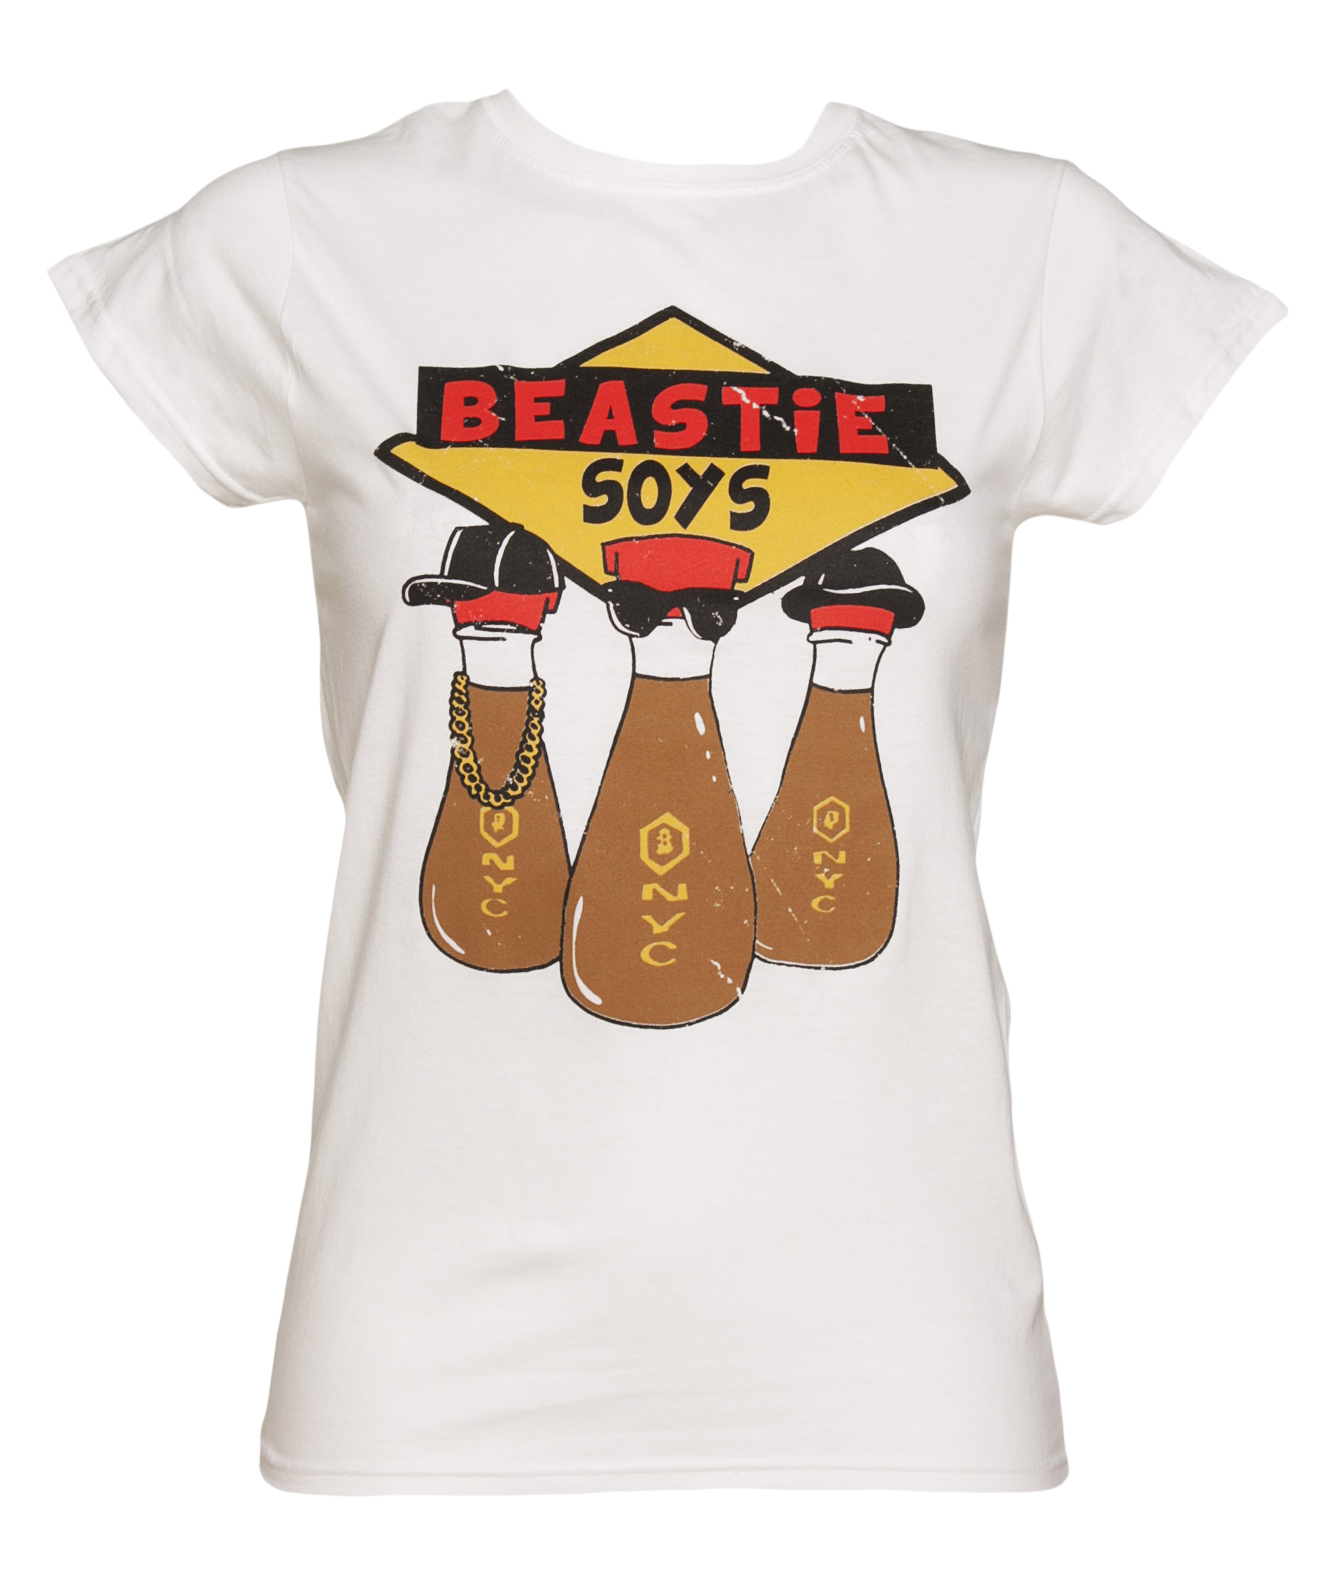 Ladies White Beastie Soys T-Shirt from Cool Toons